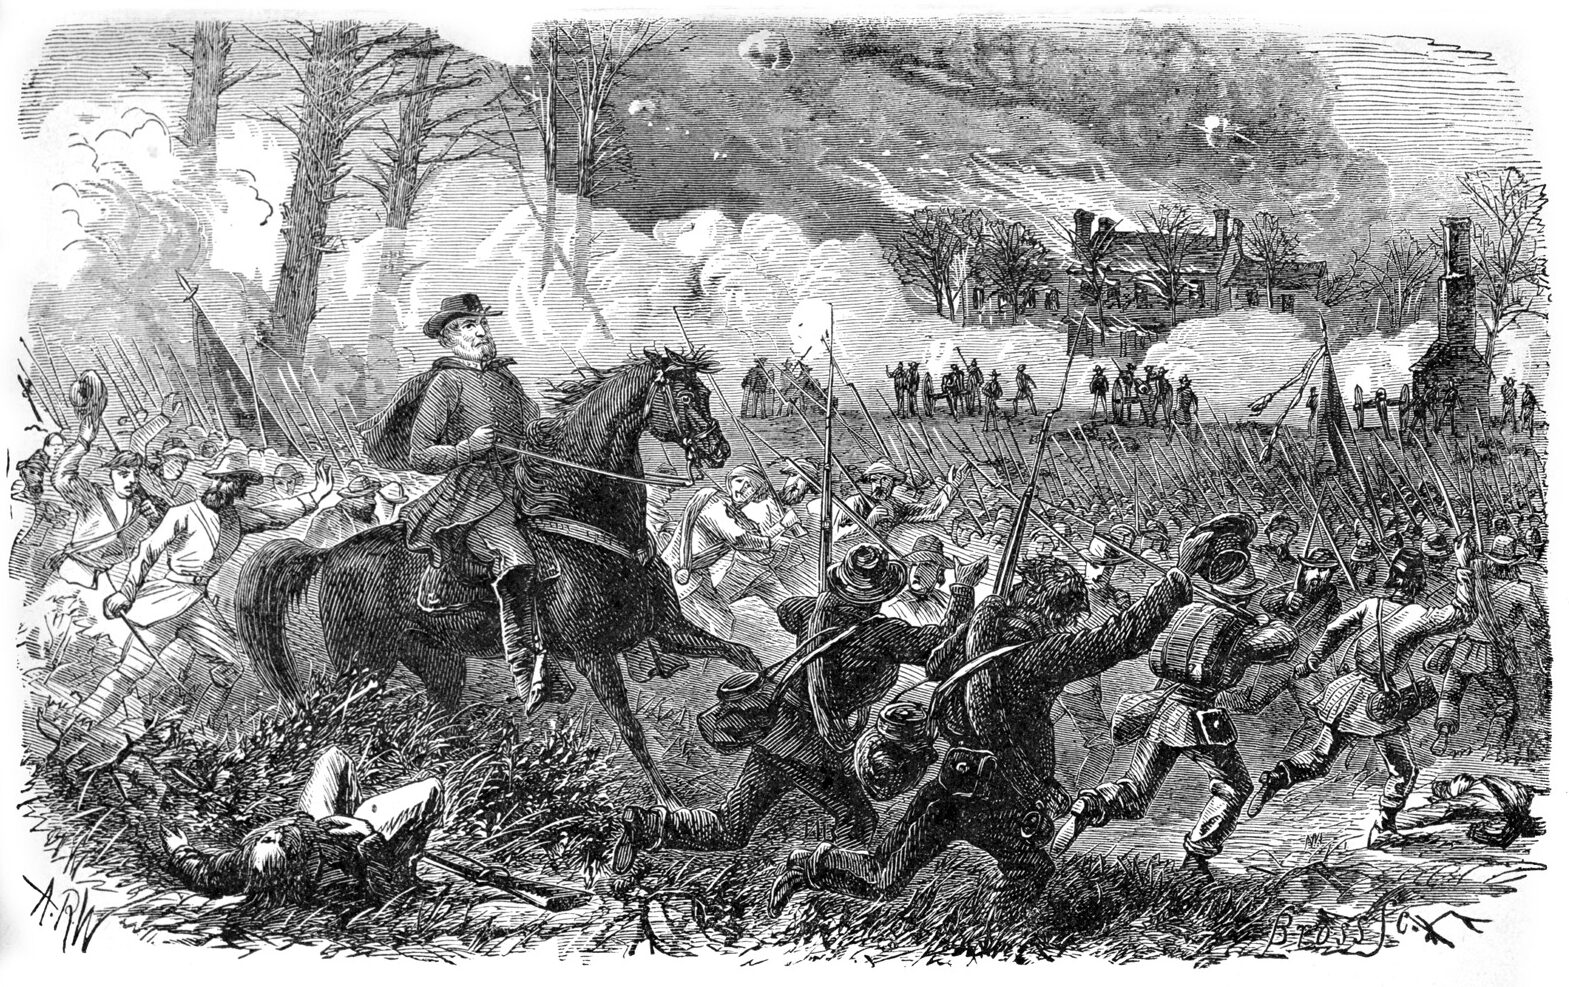 By late morning on May 3, the two halves of General Robert E. Lee’s Army of Northern Virginia were reunited at the Chancellorsville clearing. When Lee rode up to the Chancellor House, his troops cheered him long and loud.